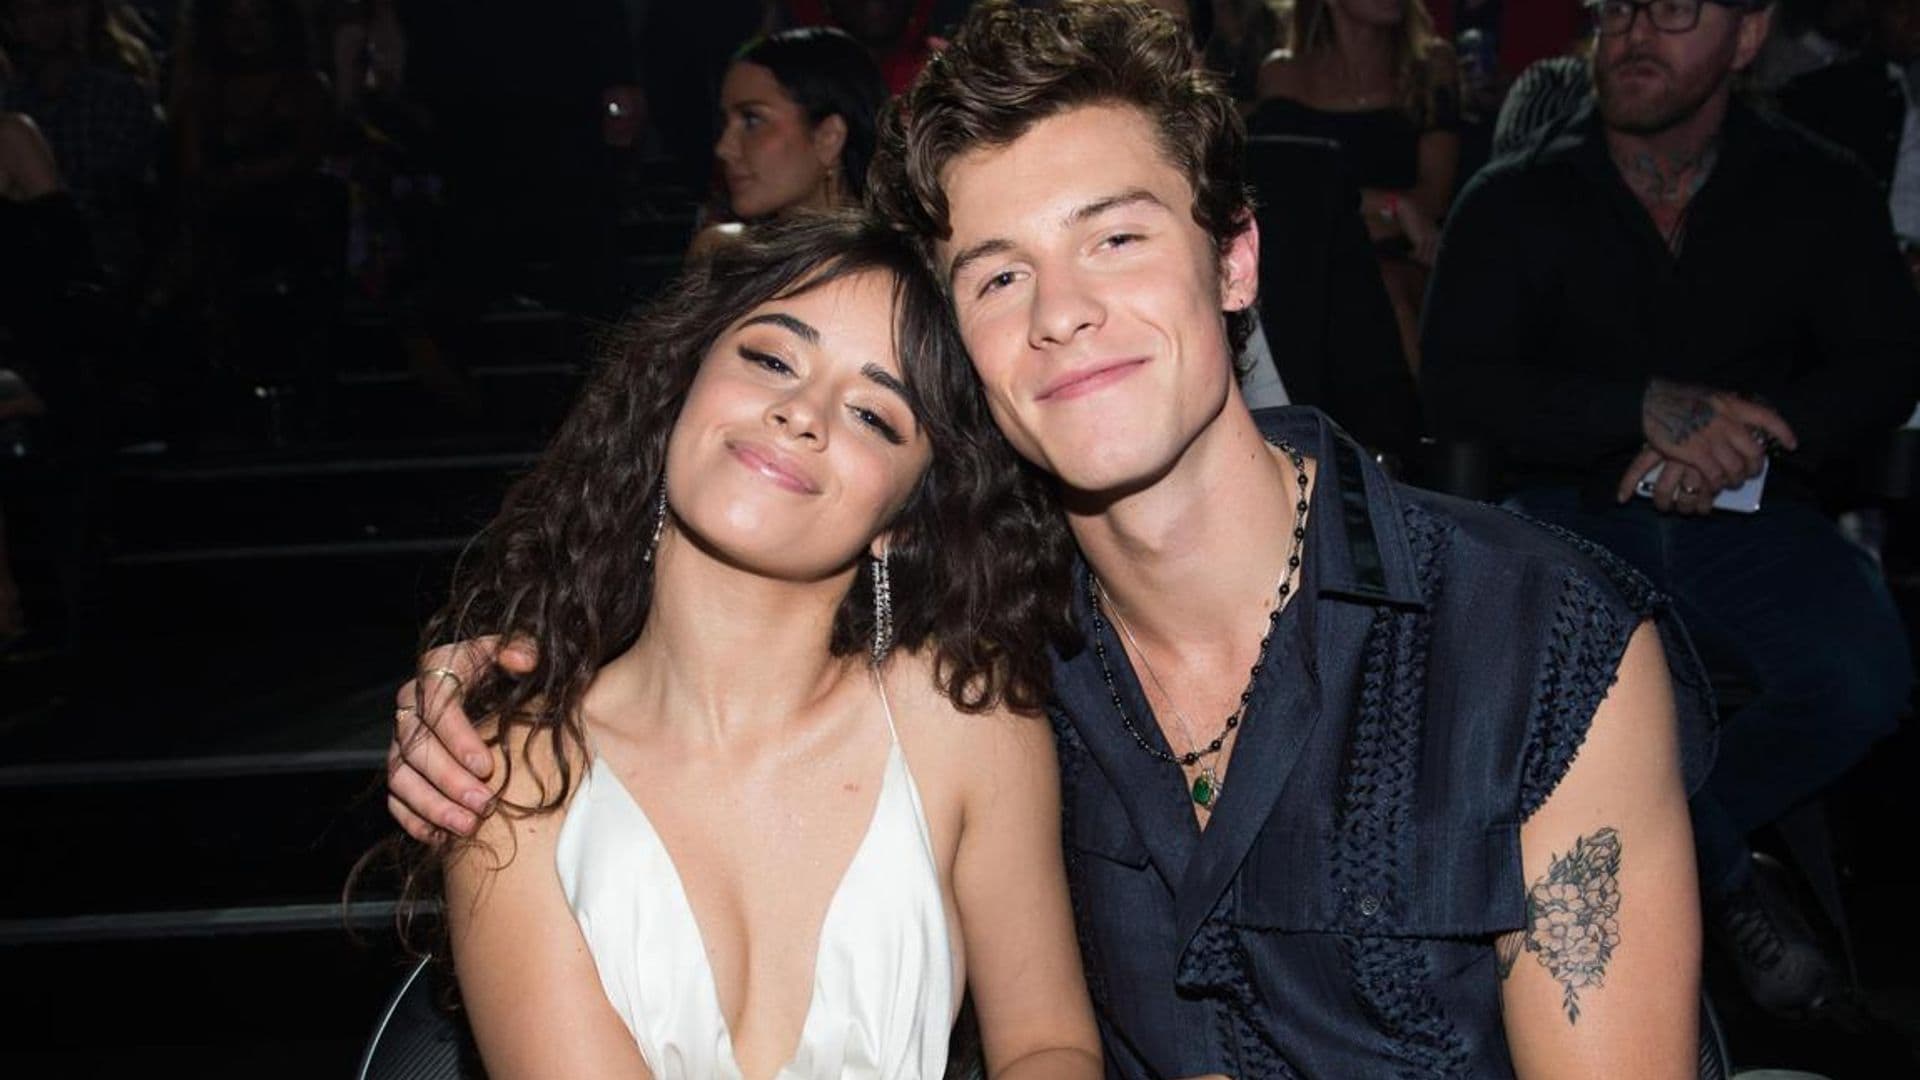 Camila Cabello and Shawn Mendes donate 200 Cuban sandwiches to medical team at Miami hospital